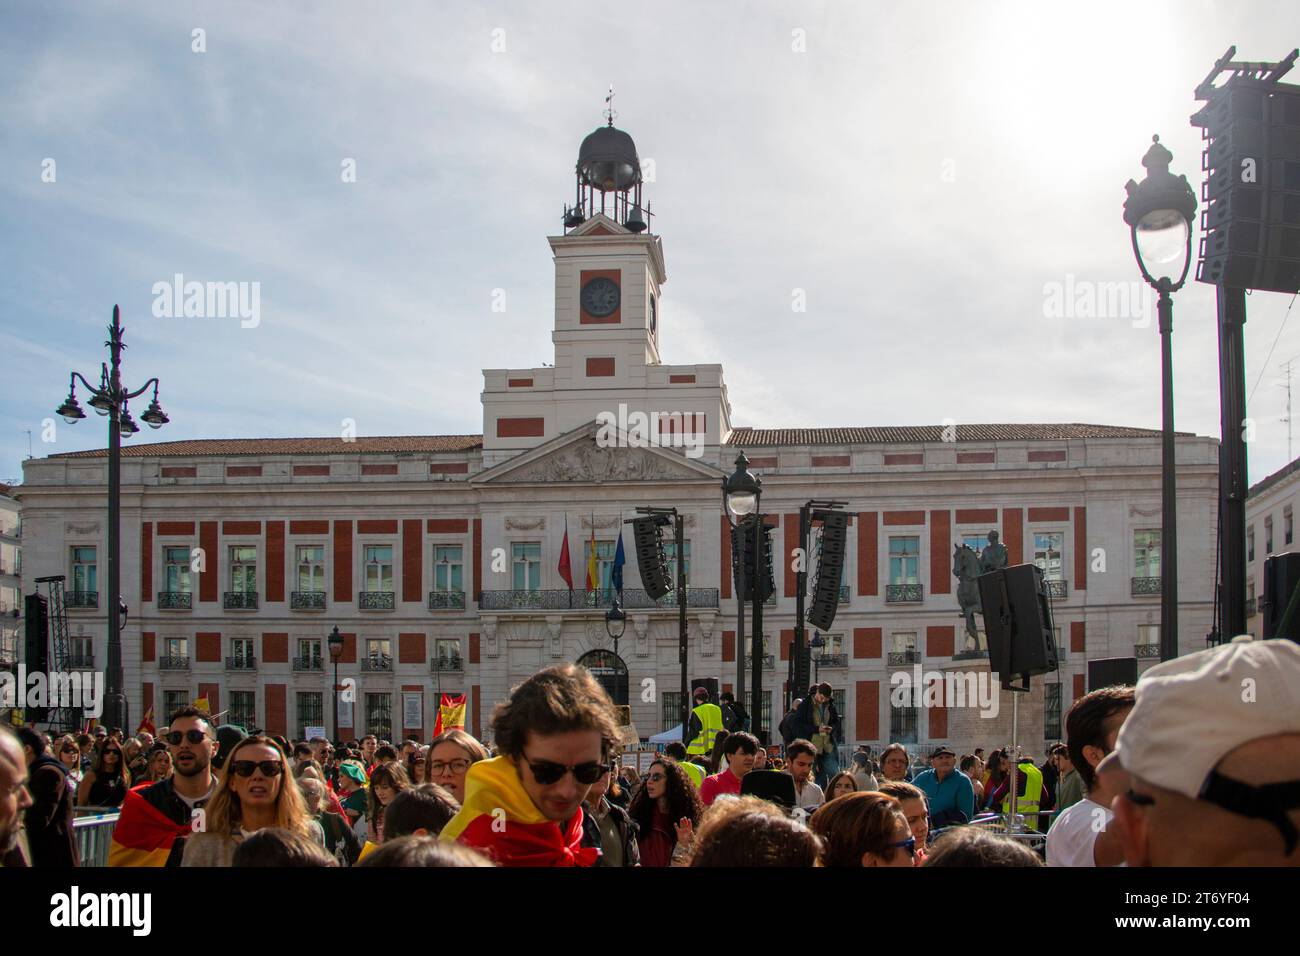 Different images of a demonstration held in Madrid at La Puerta del Sol where different people can be seen walking through the city carrying Spanish f Stock Photo